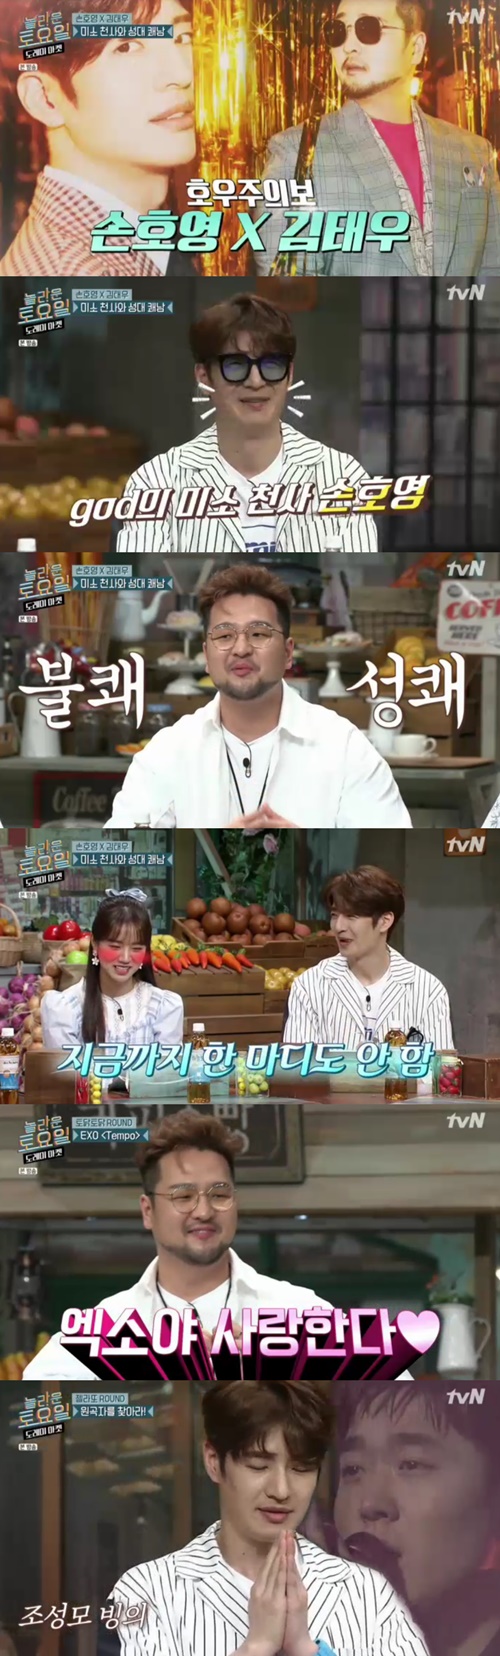 Amazing Saturday group Geodi Kim Tae Woo and Son Hoyoung showed off the national group.On the TVN entertainment program Amazing Saturday - Doremi Market, which aired on the 24th, National Group Geodi (god) Son Hoyoung Kim Tae Woo appeared.On this day, Geodi entered the studio with a live song Heavenly Balloon.Shin Dong-yup directed Son Hoyoung, saying: If you first set up an image wrong, it hardens until you die.Son Hoyoung should laugh for life, he laughed.An introduction to Kim Tae Woo also followed.Boom said to Kim Tae Woo, I am a person with the nickname of a vocalist. Kim Tae Woo laughed at the something is strange.Hyeris fanfare was also revealed: Hyeri, who sat next to Son Hoyoung on the day, said, We took one first with our relatives sisters.My sisters first picked one, and I chose Denian. Then, when Hyeri stared at Kim Tae Woo, Shin Dong-yup said, Do not talk, and laughed at everyone.Kim Tae Woos junior love also followed; he confessed to fanfare in a pre-interview, I hope the EXO song comes out.If EXO songs come out, I think I can get all the songs right, he said.But Kim Tae Woos first dictation was more of an annihilation, as he had not heard a verse with proper lyrics.Shin Dong-yup laughed at Kim Tae Woo by revealing his disappointment.Kim Tae Woo followed, but failed unfortunately and half of Food went to the short-lipped sun. Kim Tae Woo, who watched it, said, I am so hungry.I will go and buy it myself. After that, Kim Tae Woo inferred rap lyrics lime through a letter hint and succeeded in restoring his pride as an EXO fan.There was also a game of contemplation over gelato.The most popular chocolate Ice cream on the day was frozen so that it could not be solved, which frustrated the members. Son Hoyoung also succeeded in correcting the correct answer.Son Hoyoung, who hit the song of Jo Sung Mo, succeeded in solving all the chocolate gelato and showed a cute aspect such as It was not my will.Kim Tae Woo also succeeded in acquiring gelato.He opened the correct answer song Our Love is the way and wiped out the remaining cranberries, and laughed at Son Hoyoungs chocolate Ice cream.As the original National Group, the national brothers Kim Tae Woo and Son Hoyoung showed off their perfect chemistry and entertainment and presented a warm weekend to viewers.Unlike the confident appearance of the early broadcast, Huh-dang-mi, which fails to guess the correct answer, also became a laughing point.Twenty years have passed, but there was still a good reason for being a National Group in the memory of the people.Photos  tvN